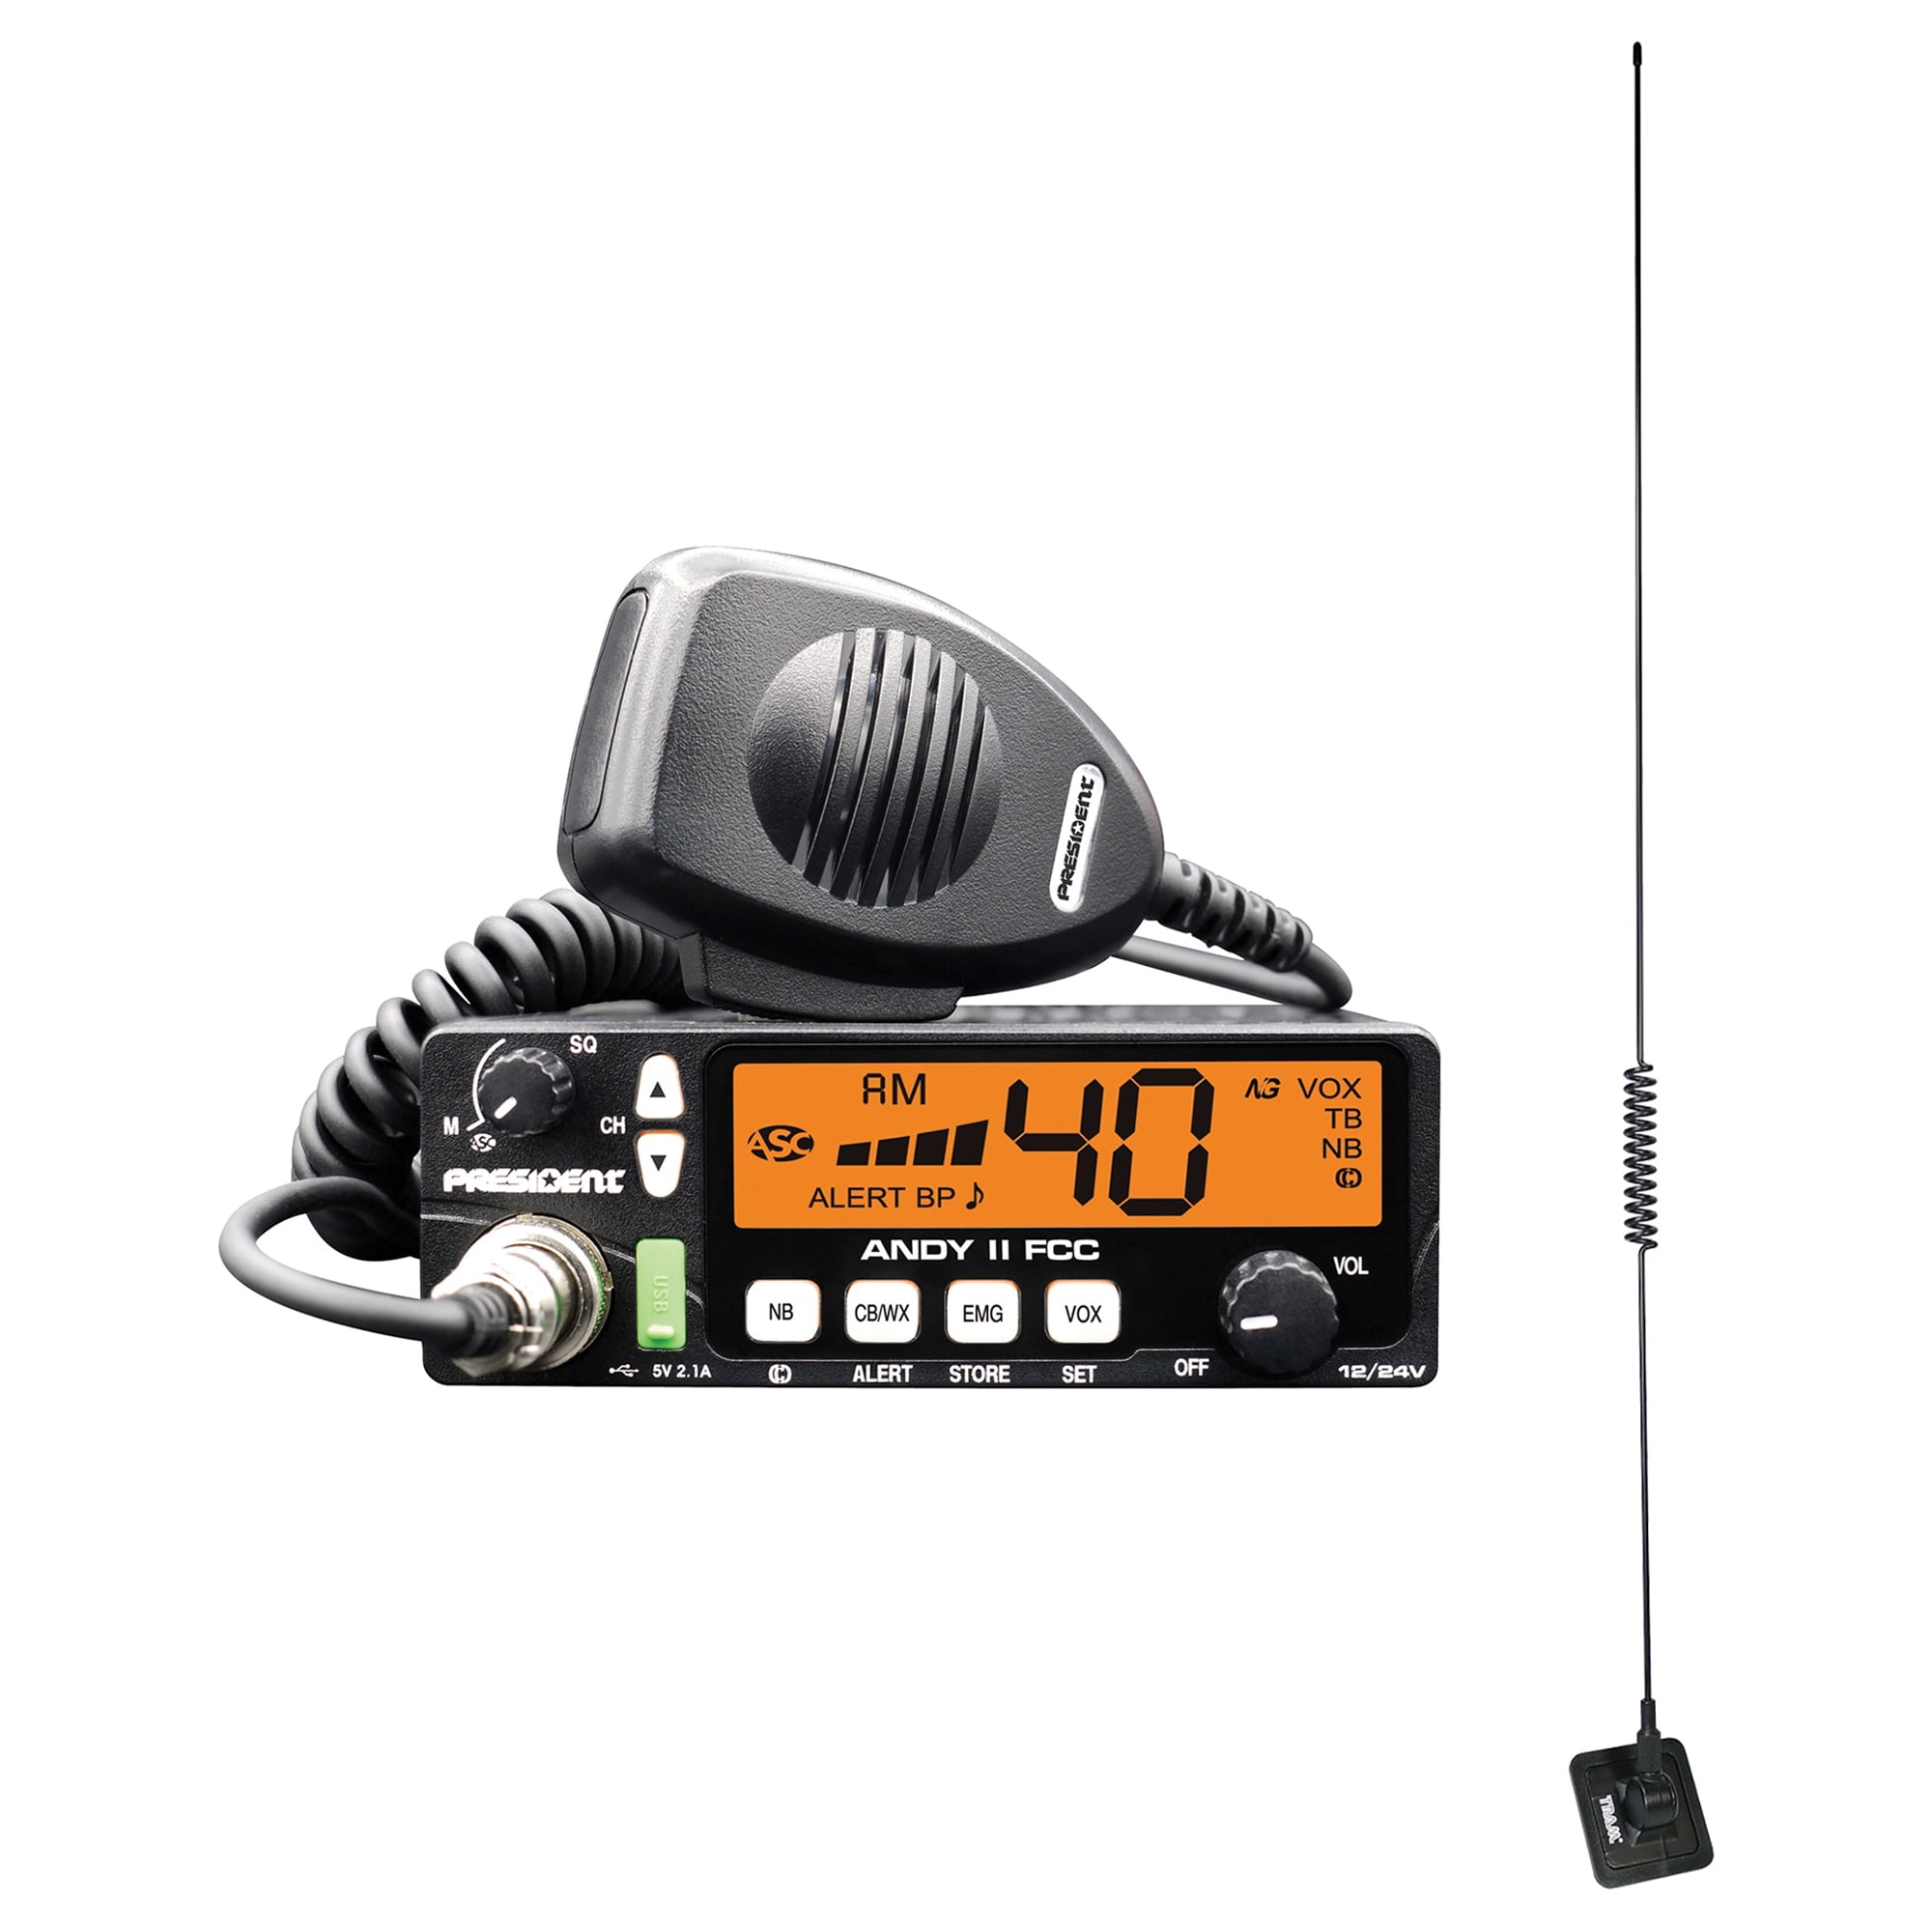 New PRESIDENT RONALD 10 Meter Ham Radio Transceiver PRO TUNED AND ALIGNED 